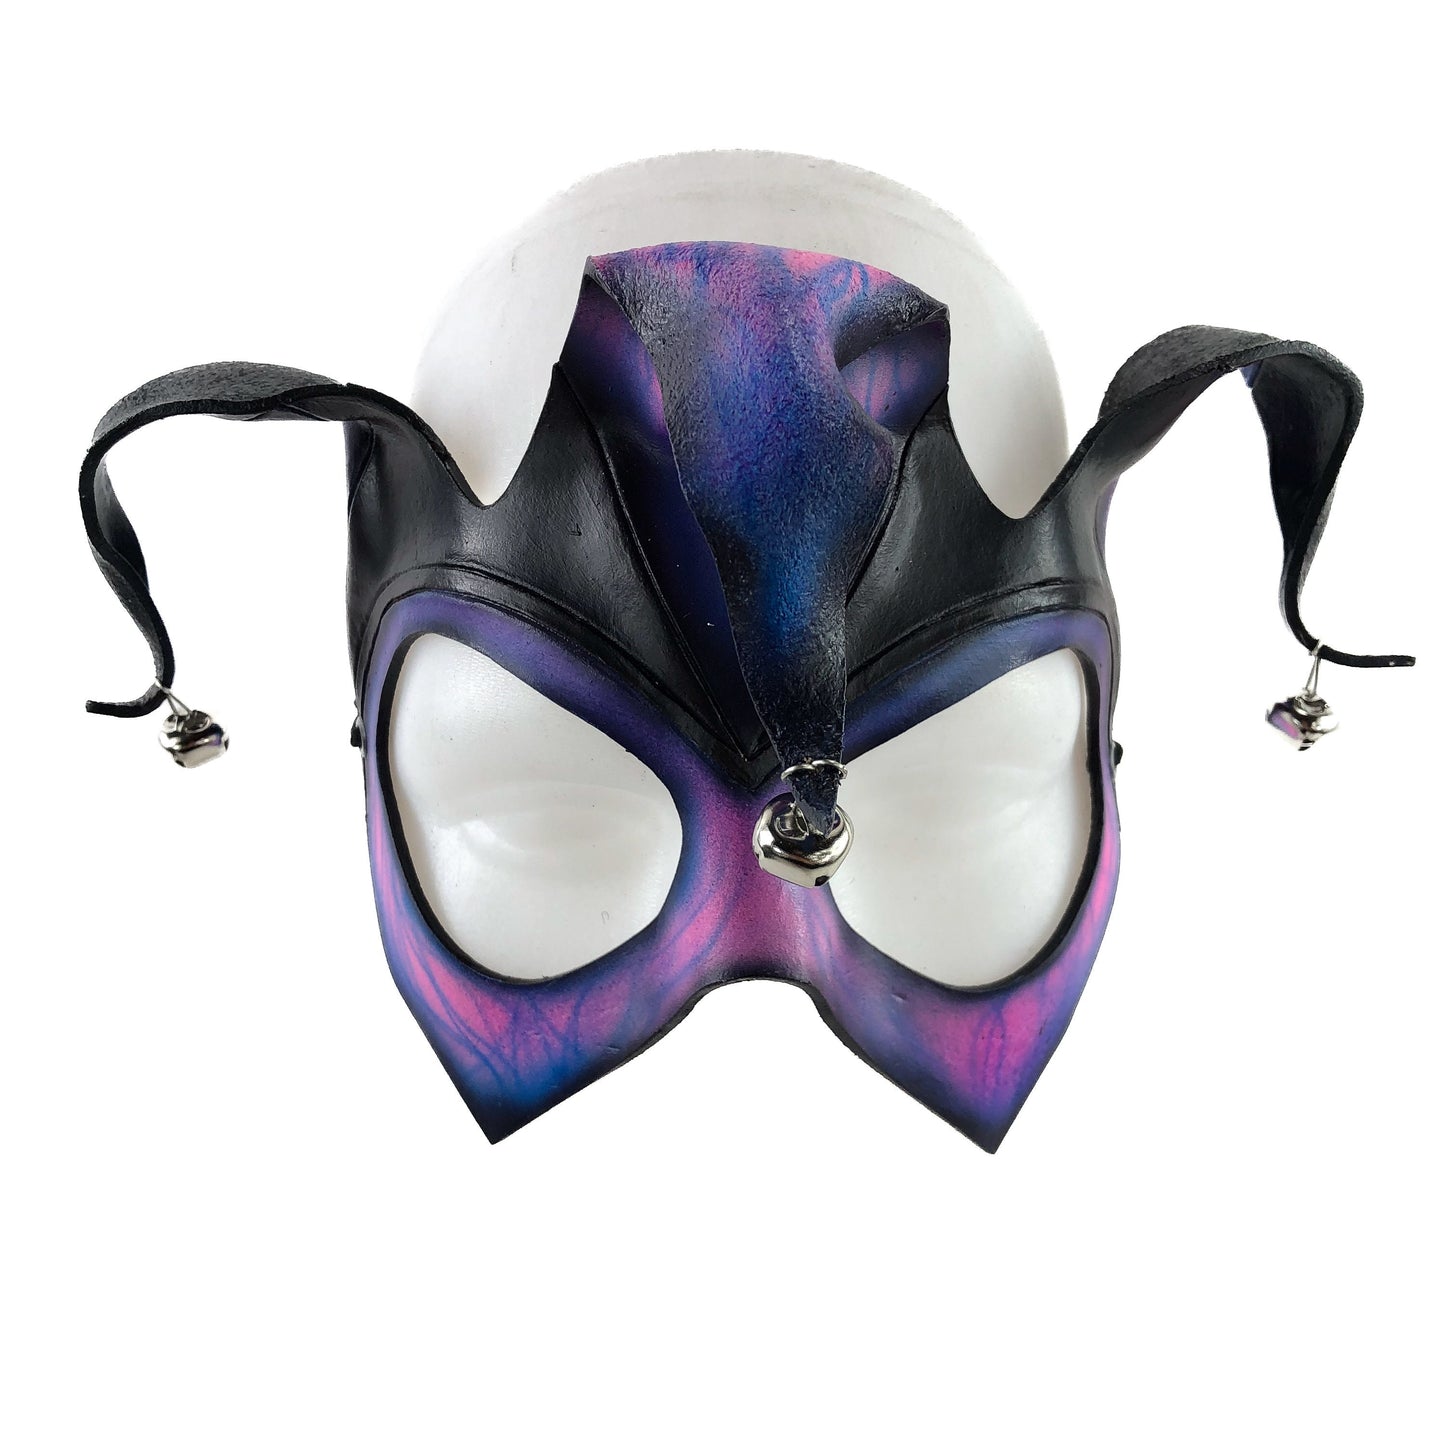 Handmade Genuine Leather Jester Mask in Blue and Pink